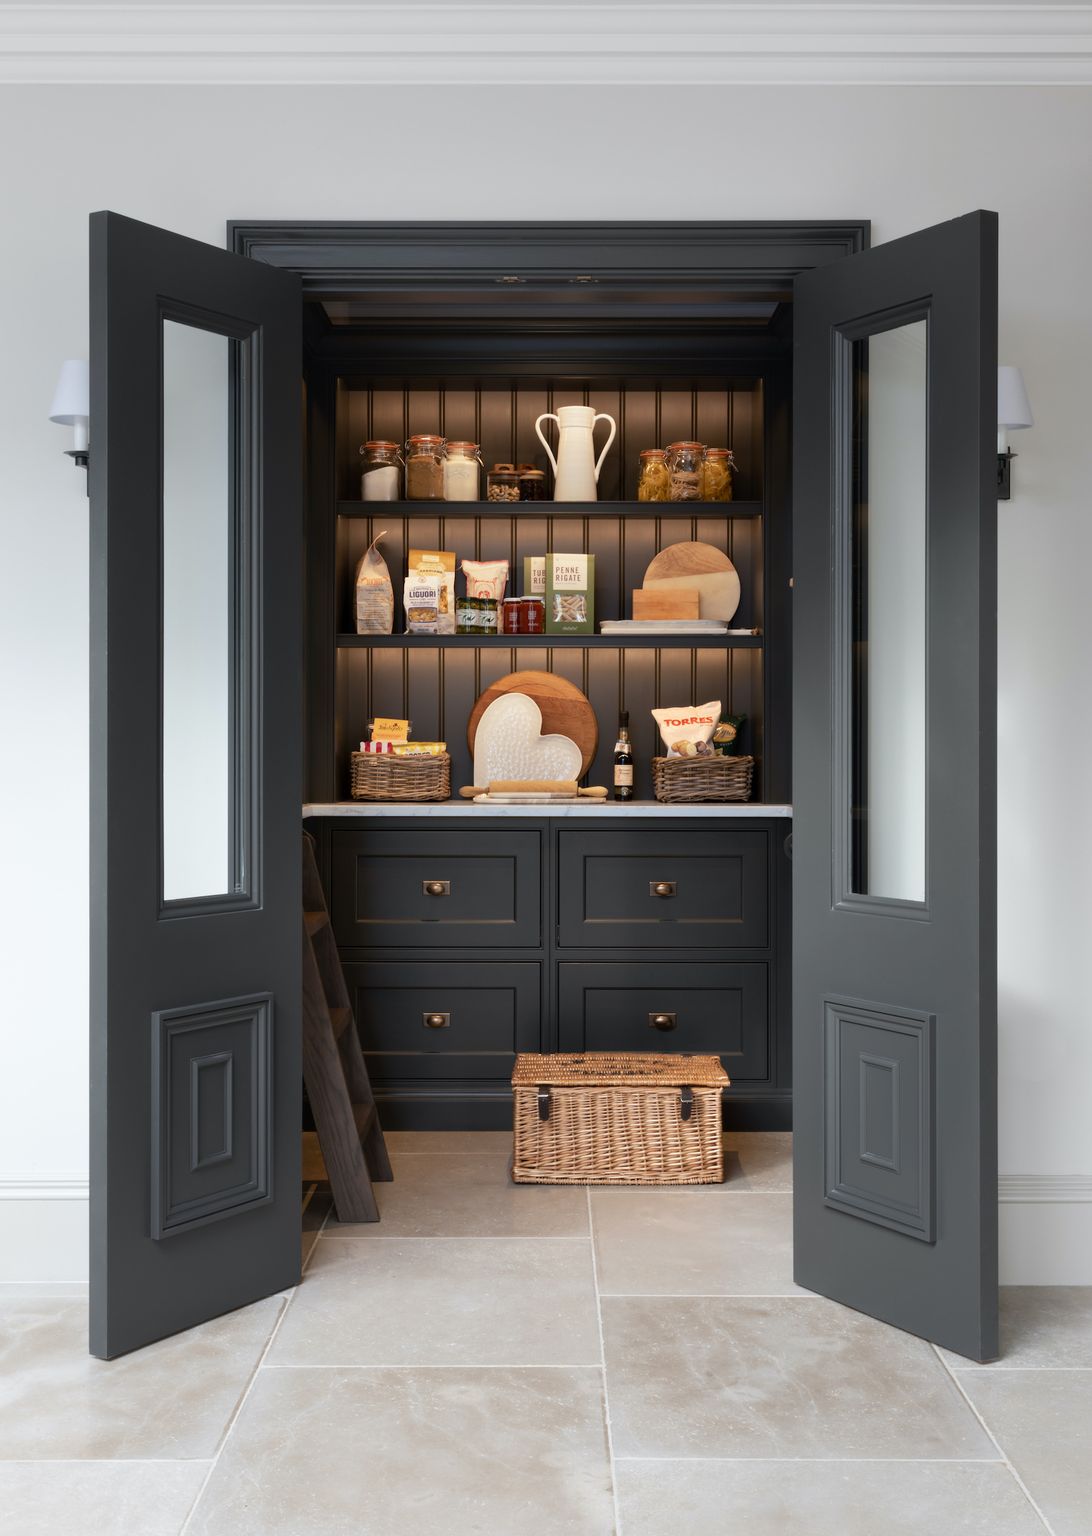 The one secret you need to know for the perfect dark and moody pantry